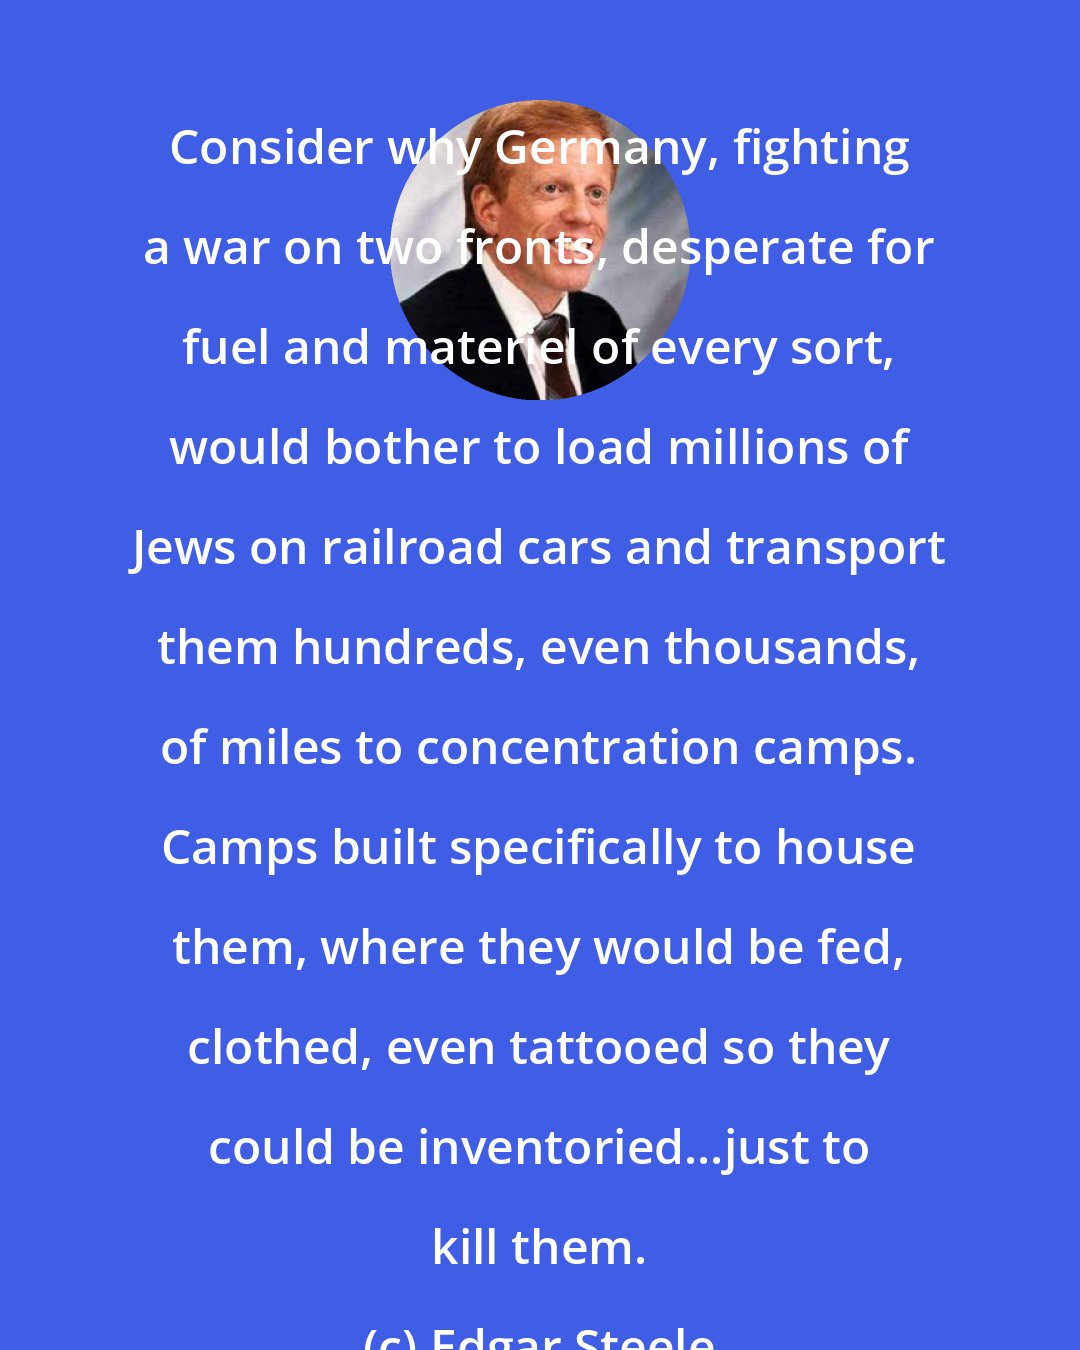 Edgar Steele: Consider why Germany, fighting a war on two fronts, desperate for fuel and materiel of every sort, would bother to load millions of Jews on railroad cars and transport them hundreds, even thousands, of miles to concentration camps. Camps built specifically to house them, where they would be fed, clothed, even tattooed so they could be inventoried...just to kill them.